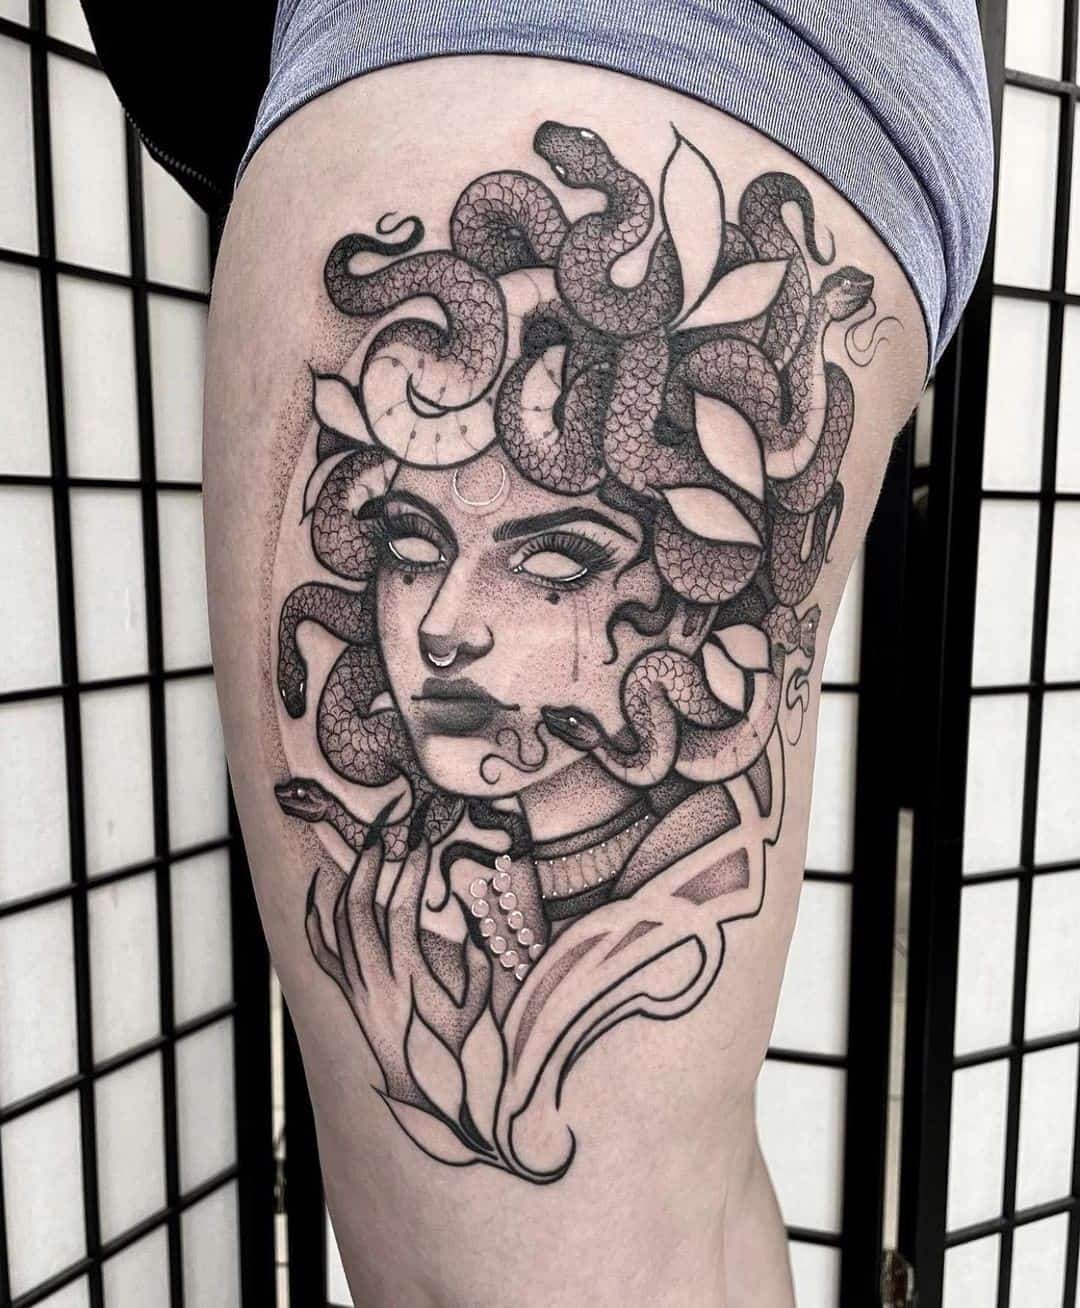 Medusa thigh piece by  Beyond the illusion tattoo parlour  Facebook